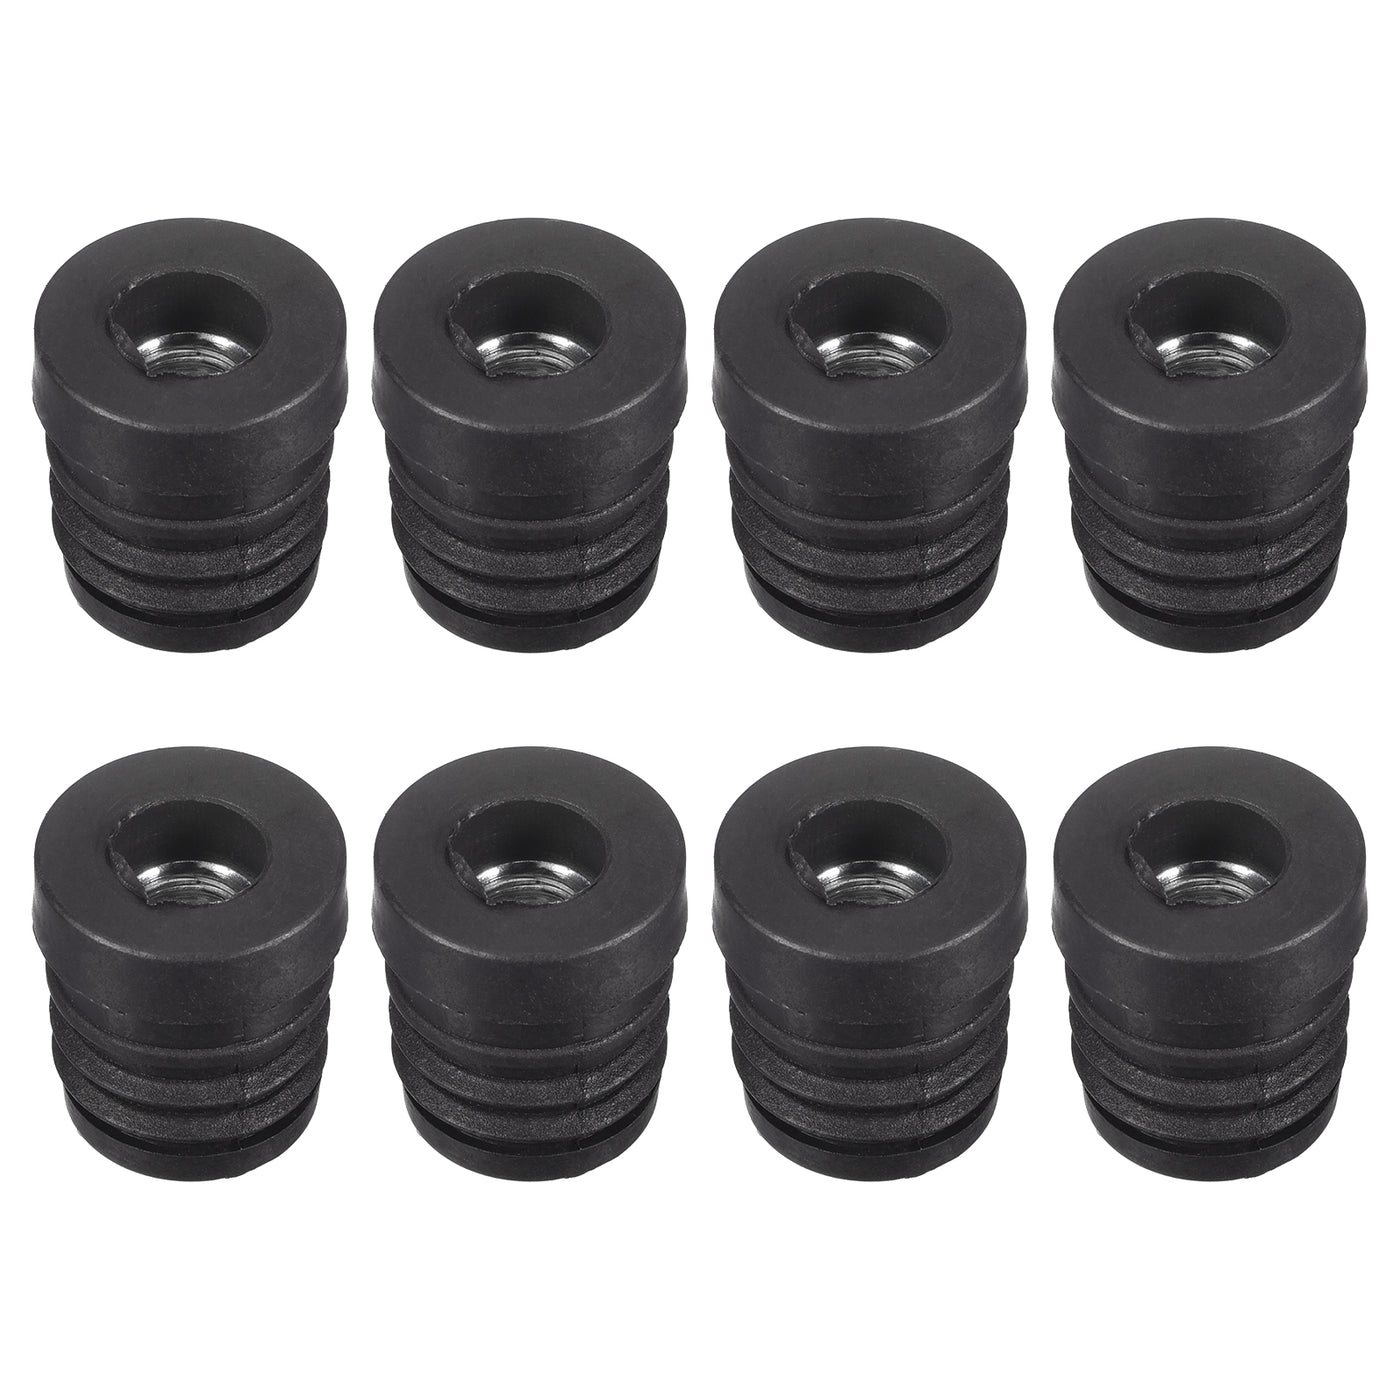 uxcell Uxcell 8Pcs 19mm/0.75" Caster Insert with Thread, Round M8 Thread for Furniture